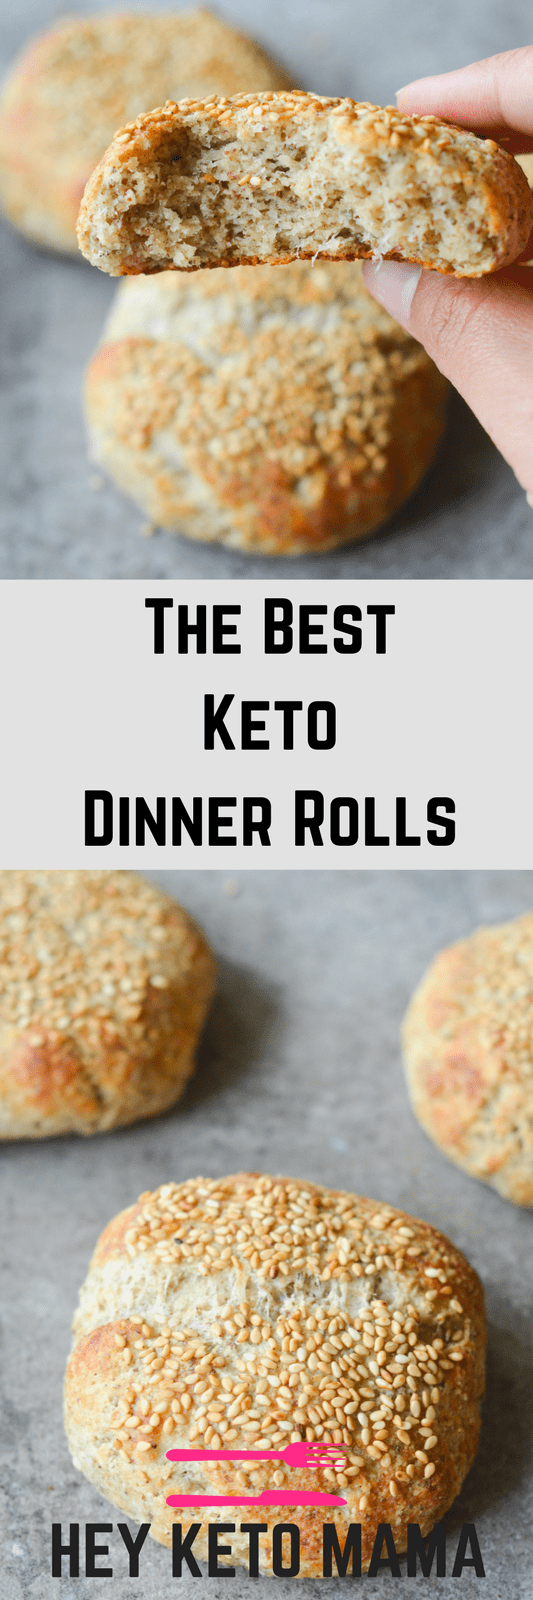 These are the best keto dinner rolls to help replace bread in your low carb lifestyle. This recipe is easy, filling, and delicious! | heyketomama.com